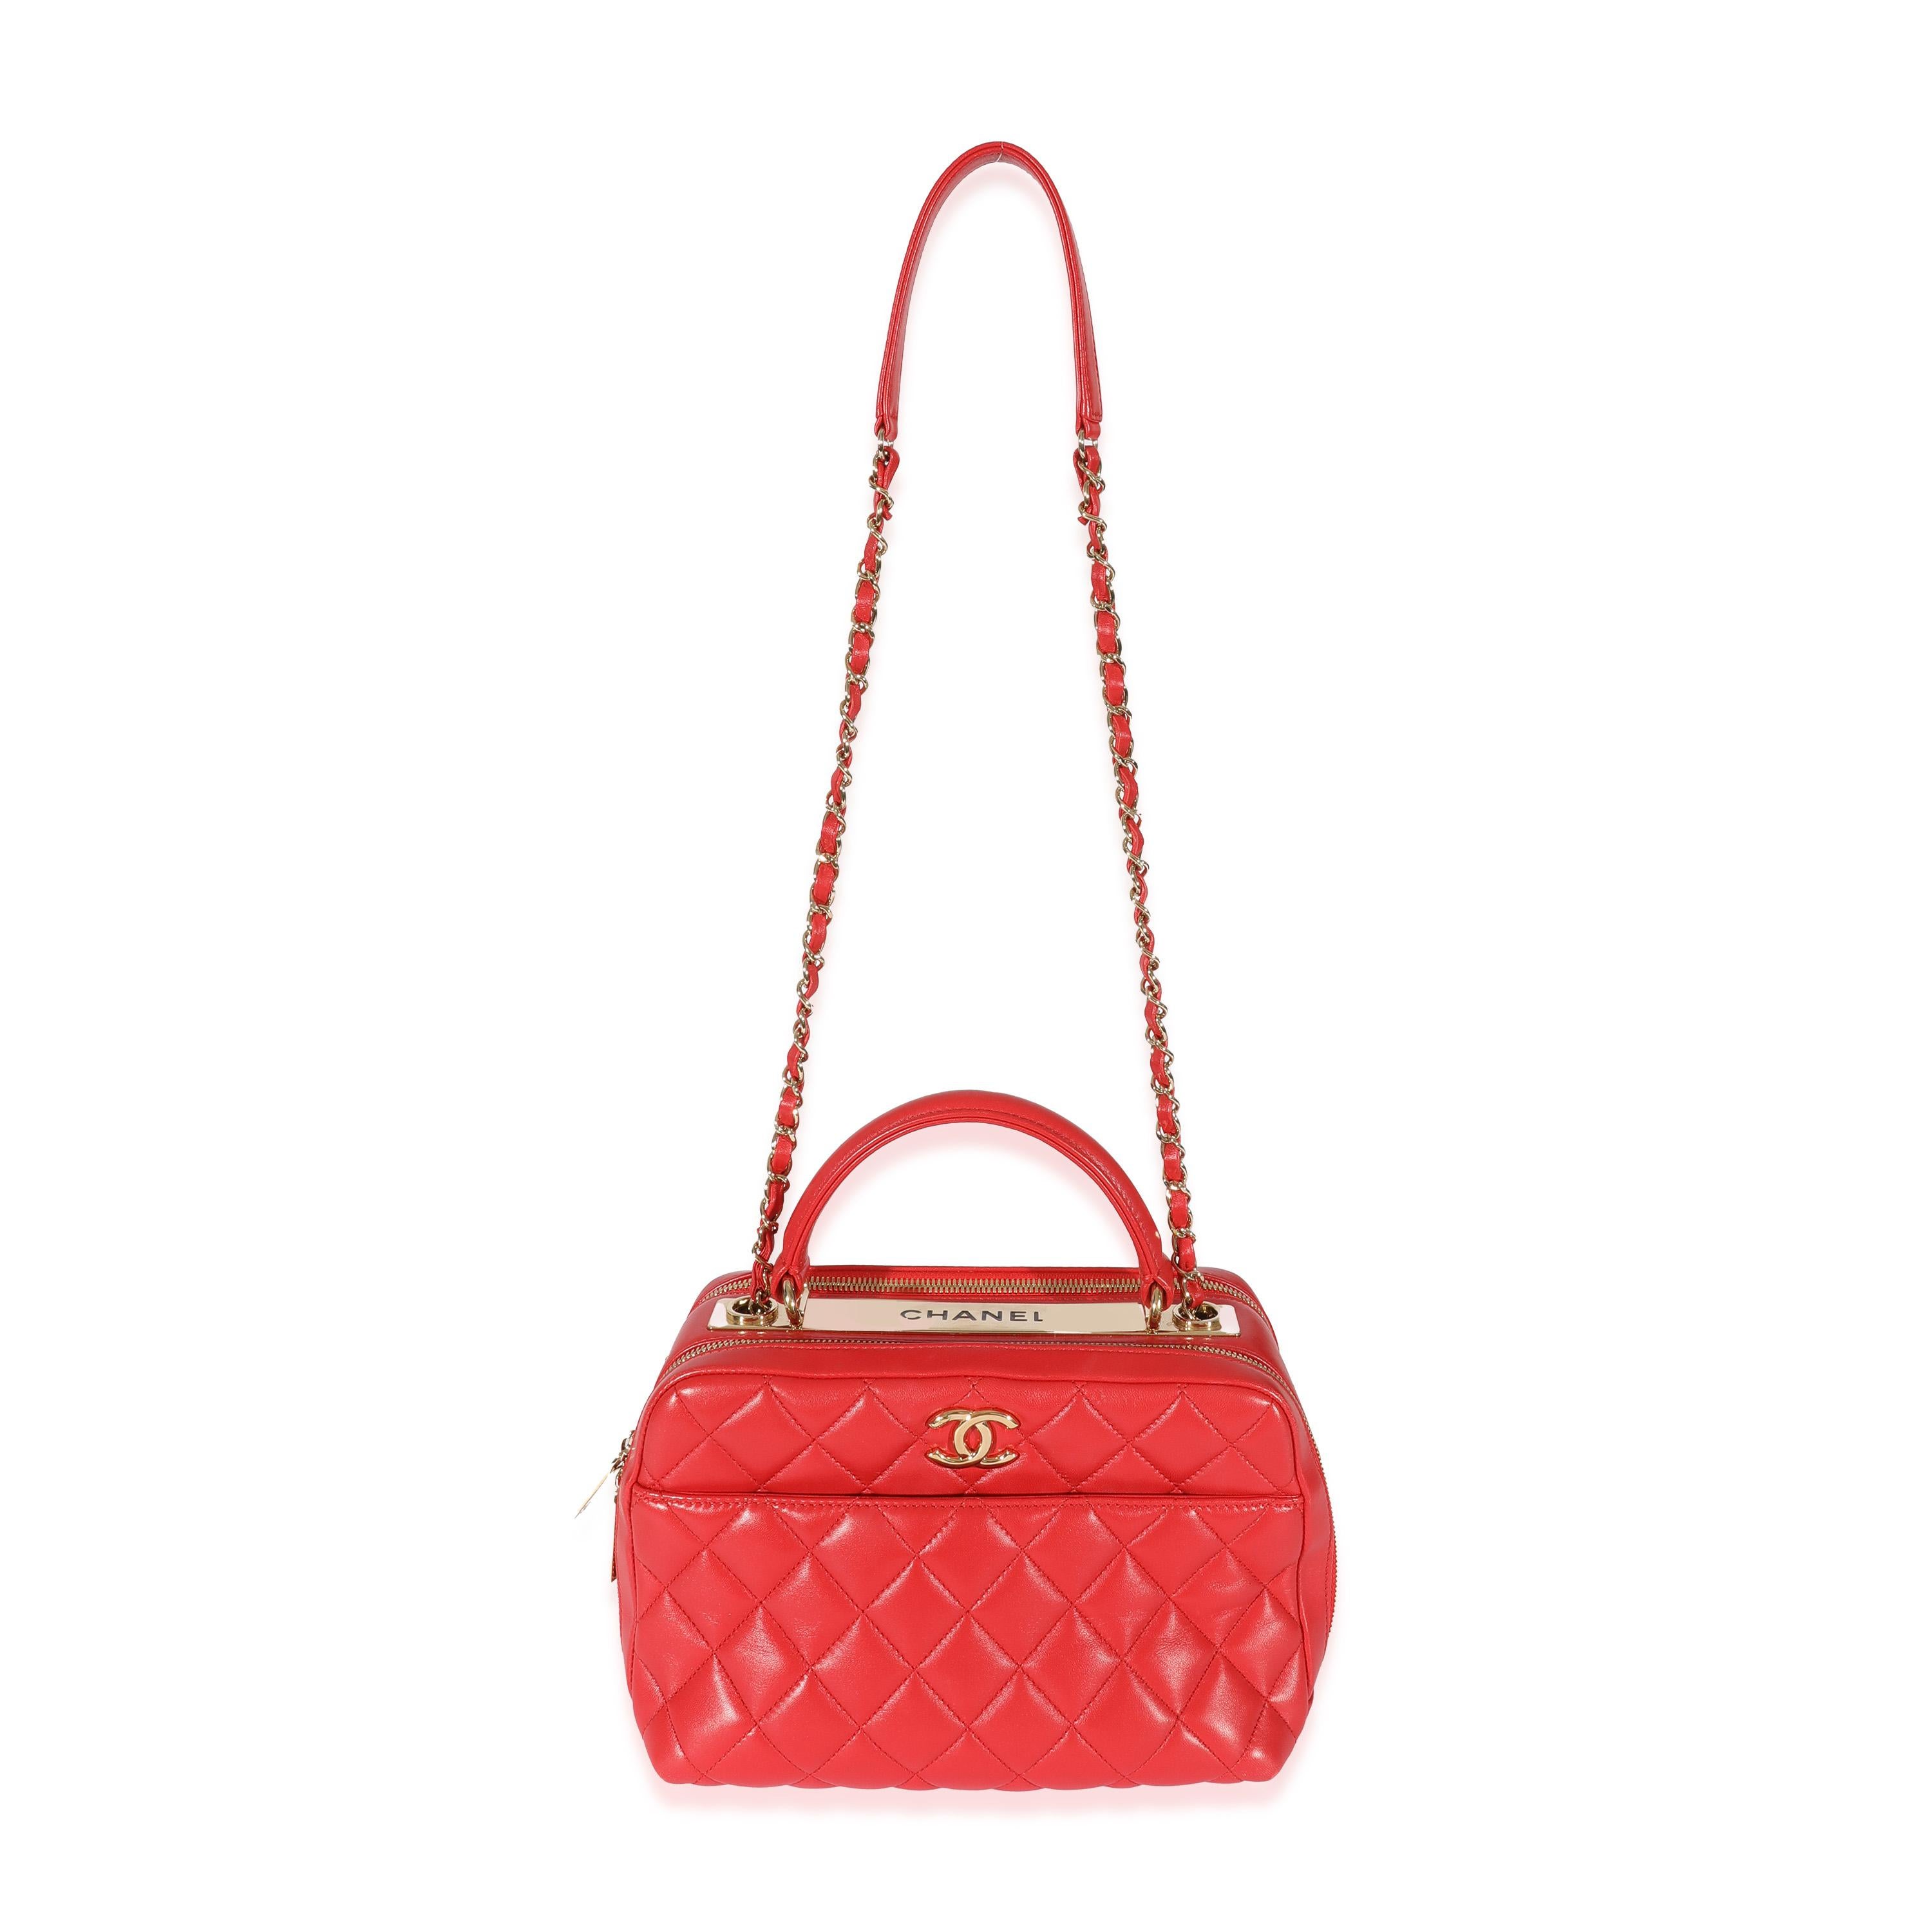 Listing Title: Chanel Red Quilted Lambskin CC Trendy Bowling Bag
 SKU: 128663
 Condition: Pre-owned 
 Handbag Condition: Very Good
 Condition Comments: Very Good Condition. Plastic on interior hardware. Scratching to exterior hardware. Scuffing and